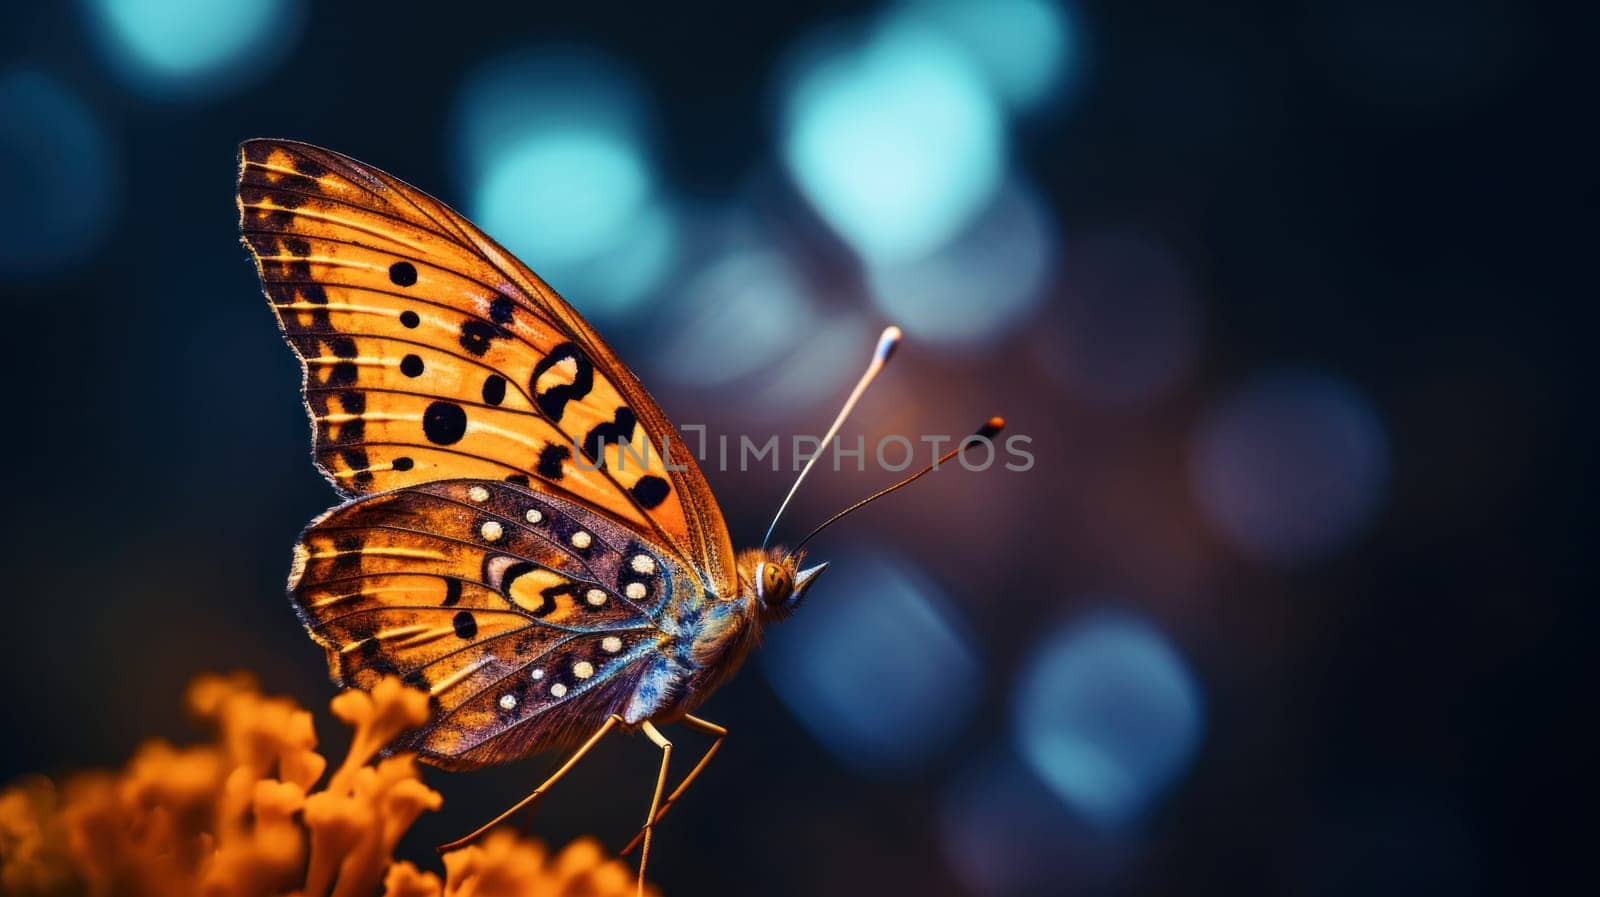 A butterfly sitting on a flower with blurry background